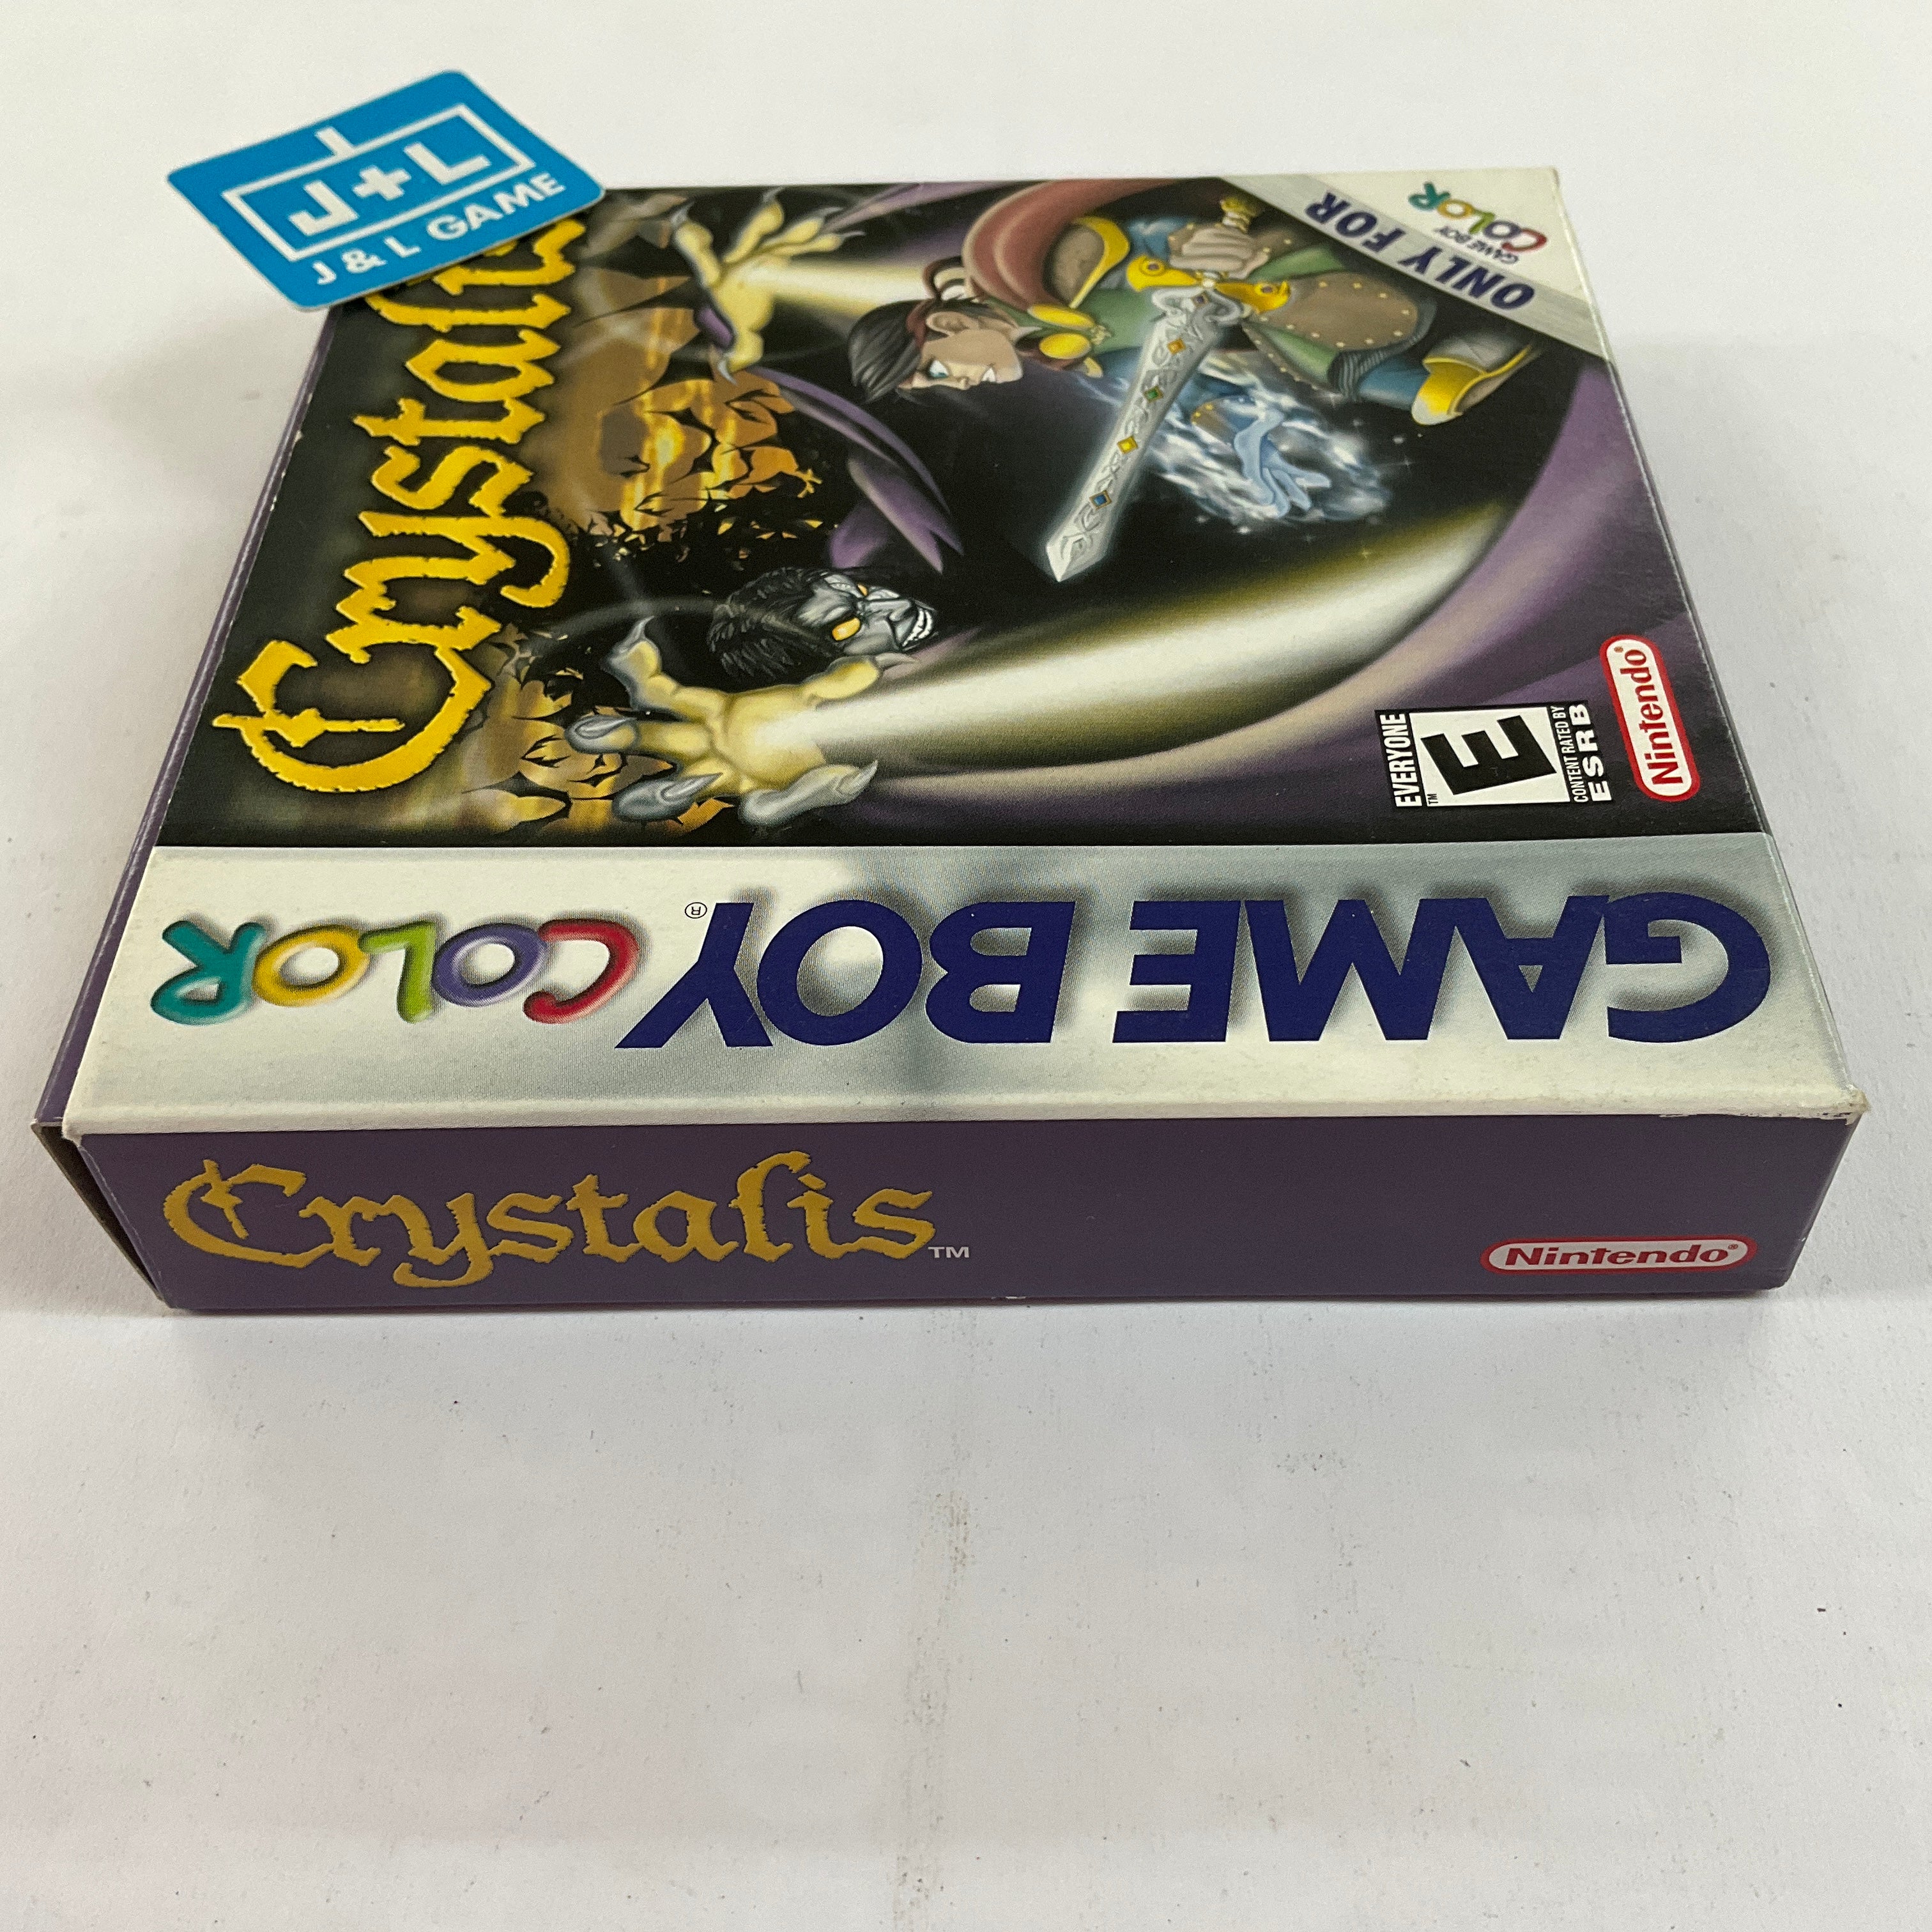 Crystalis - (GBC) Game Boy Color [Pre-Owned] Video Games Nintendo   